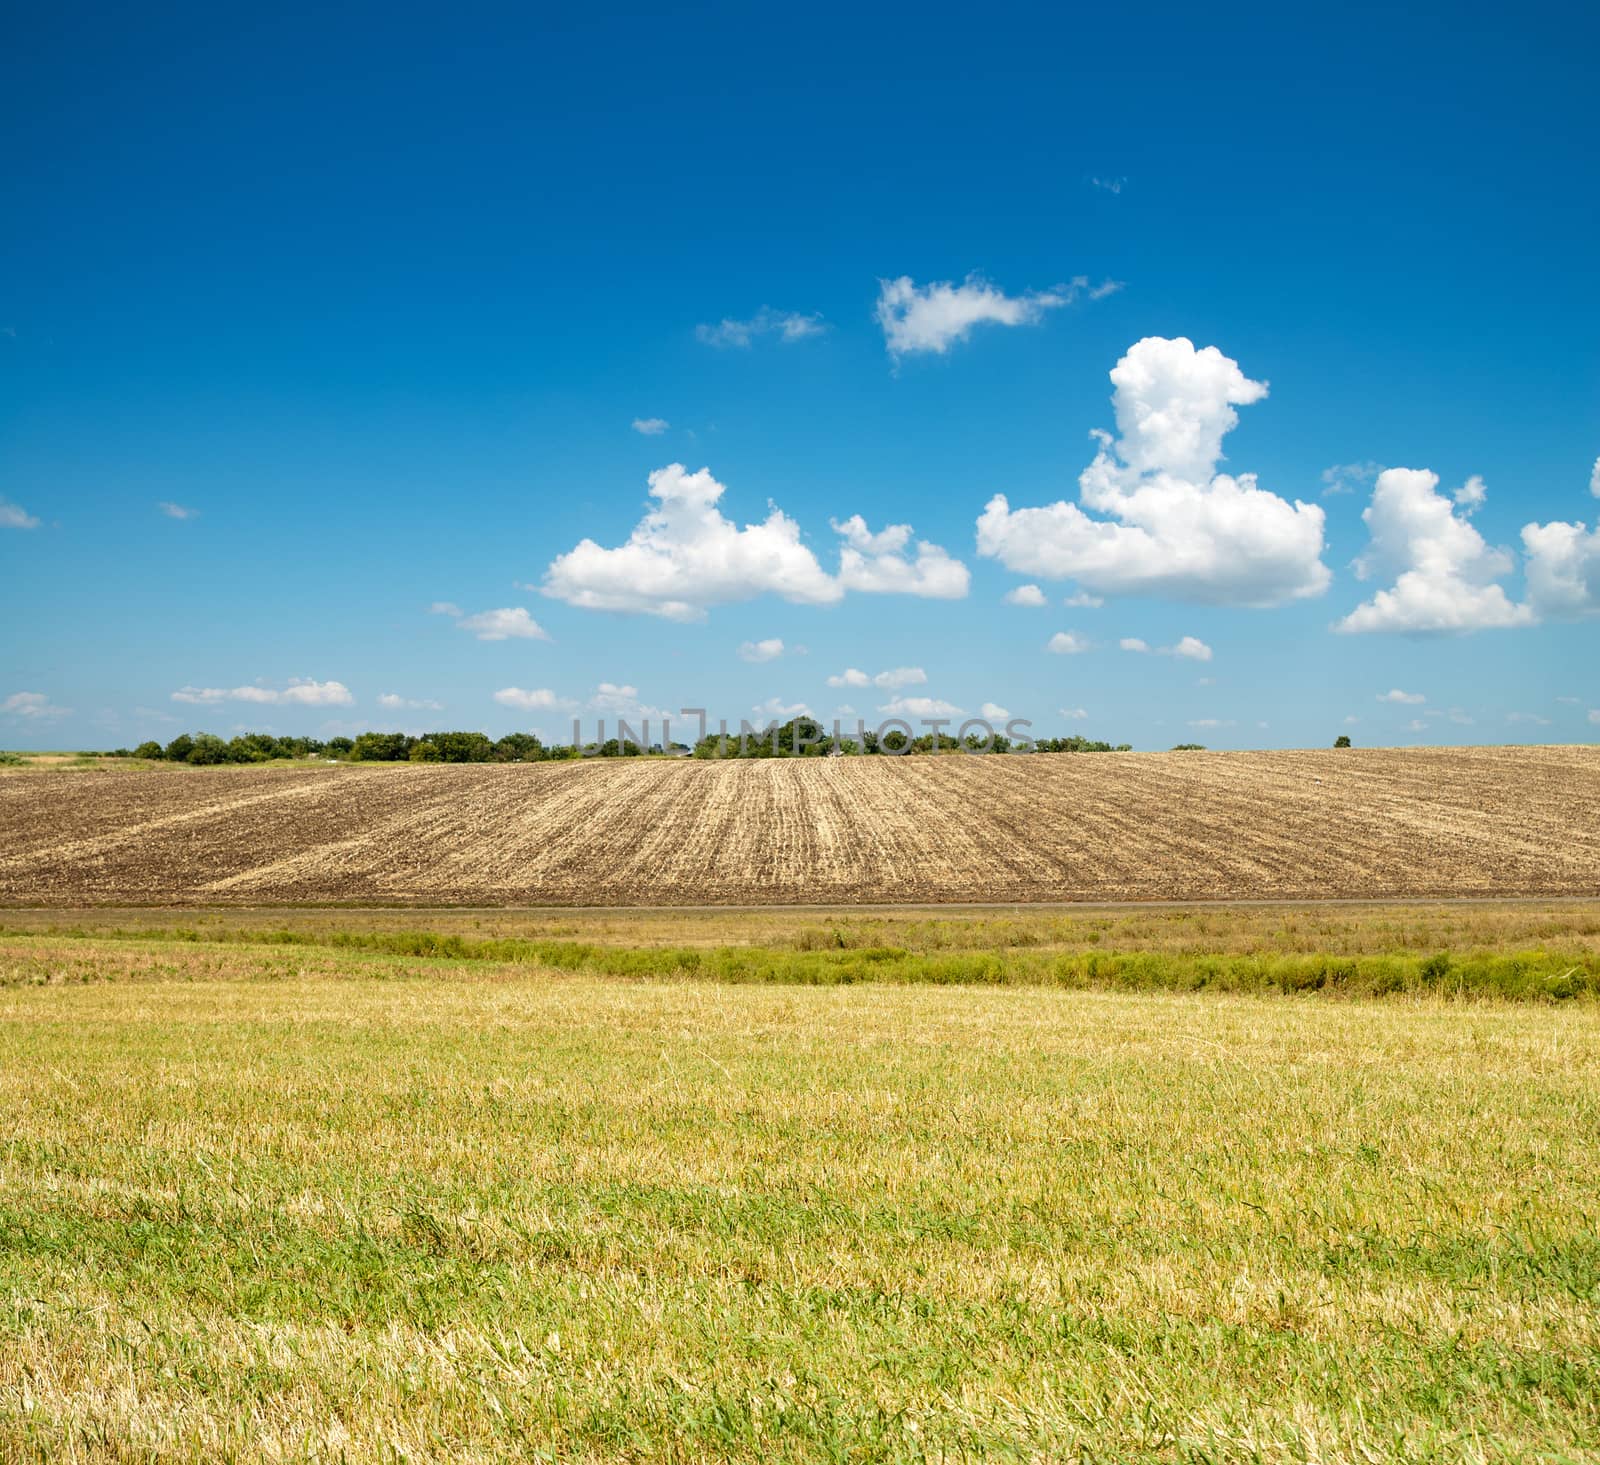 ploughed and green fields under blue cloudy sky